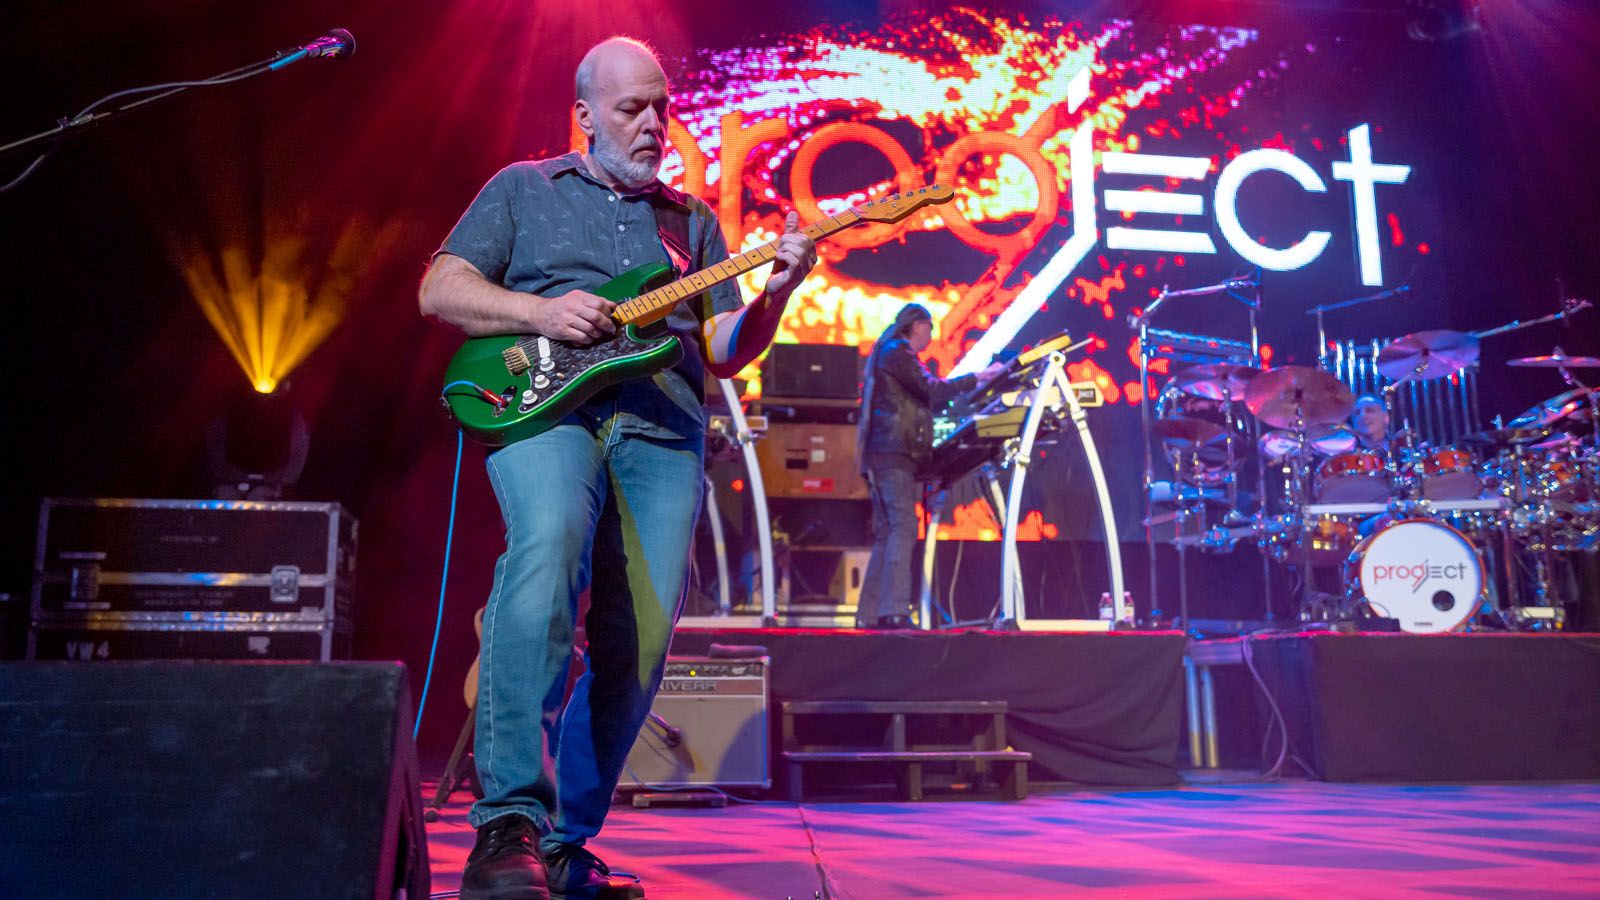 ProgJect: The Ultimate Prog Experience will be at Sweetwater Sound on Thursday, Sept. 7.